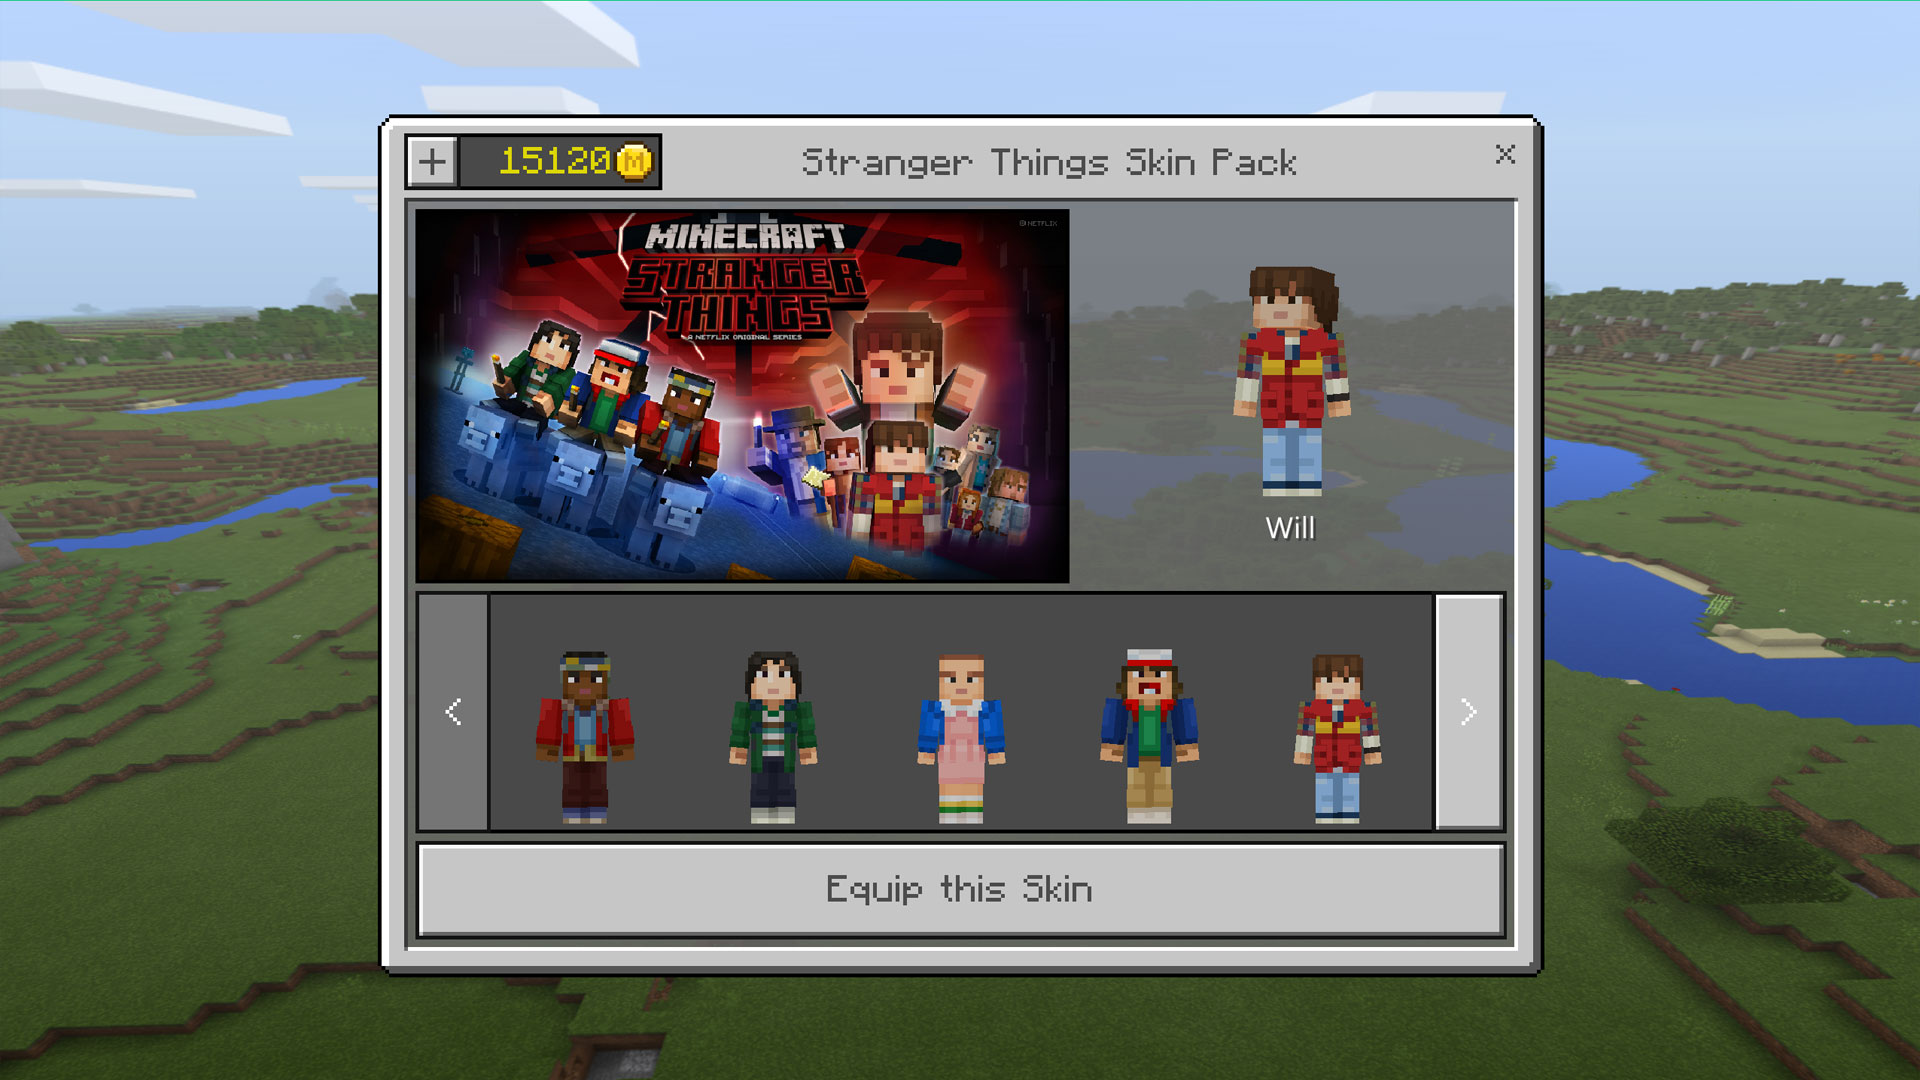 Minecraft Stranger Things Skin Pack Review